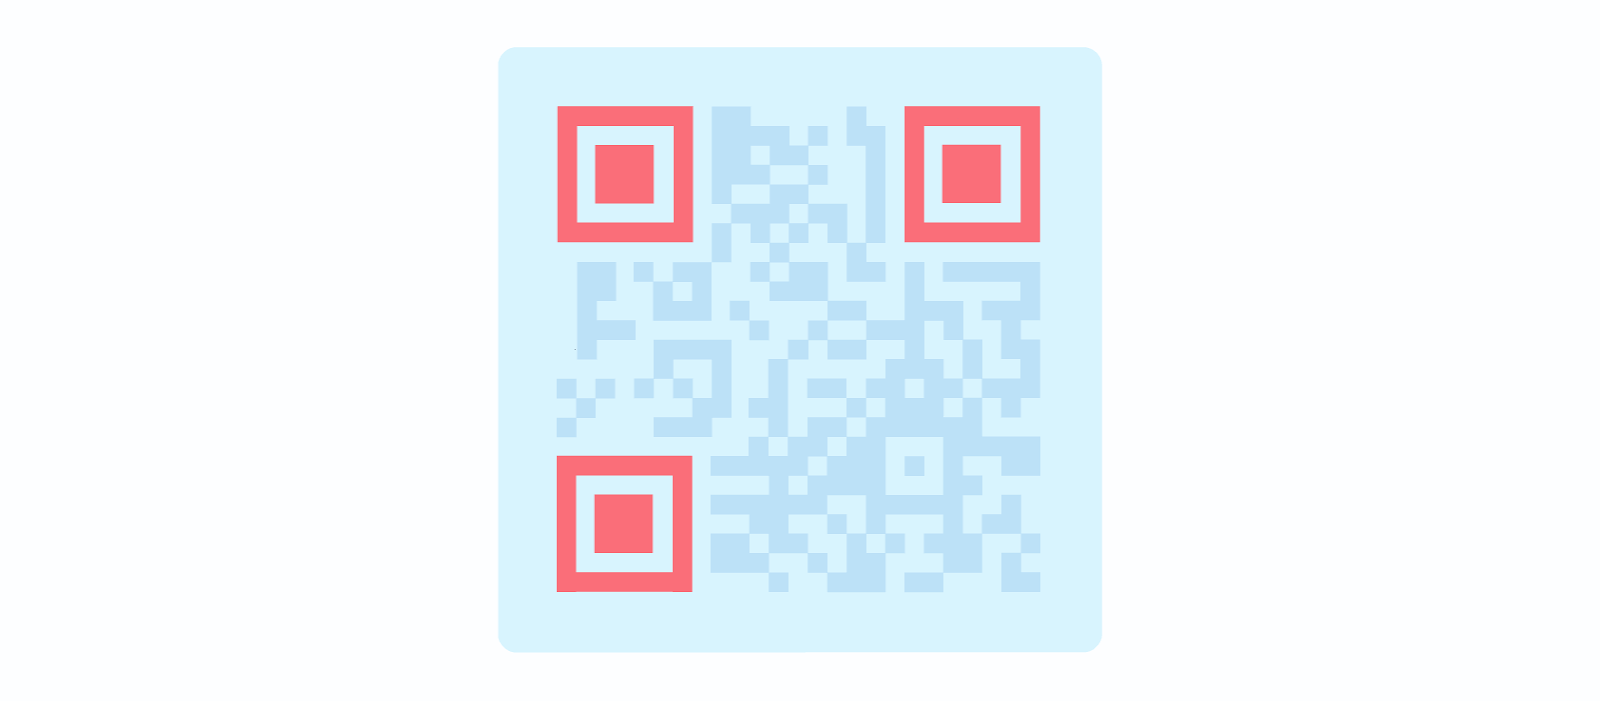 Example of positioning markings in a QR Code